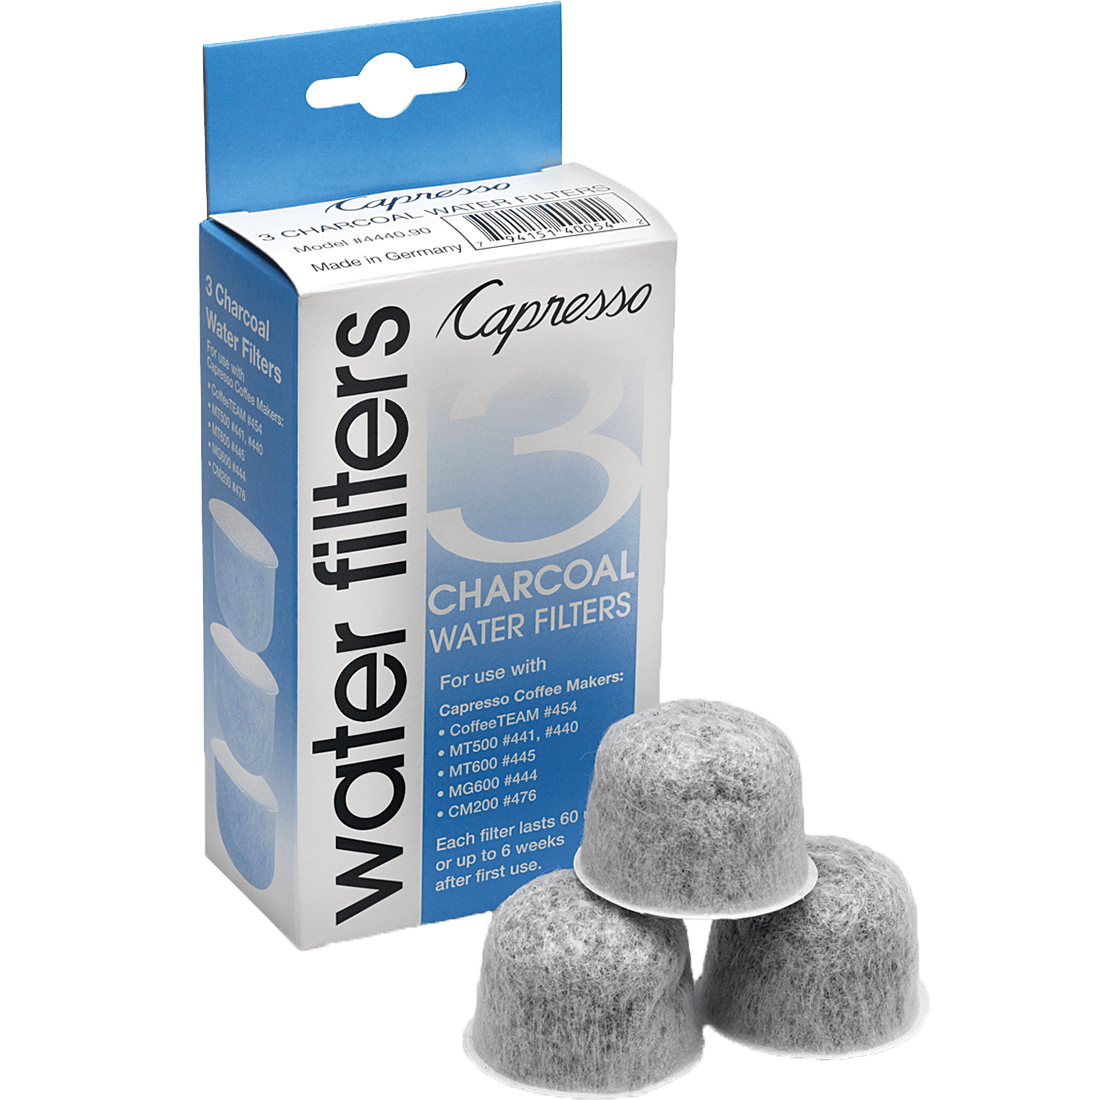 Capresso 3-pack Charcoal Water Filters (4440.90)